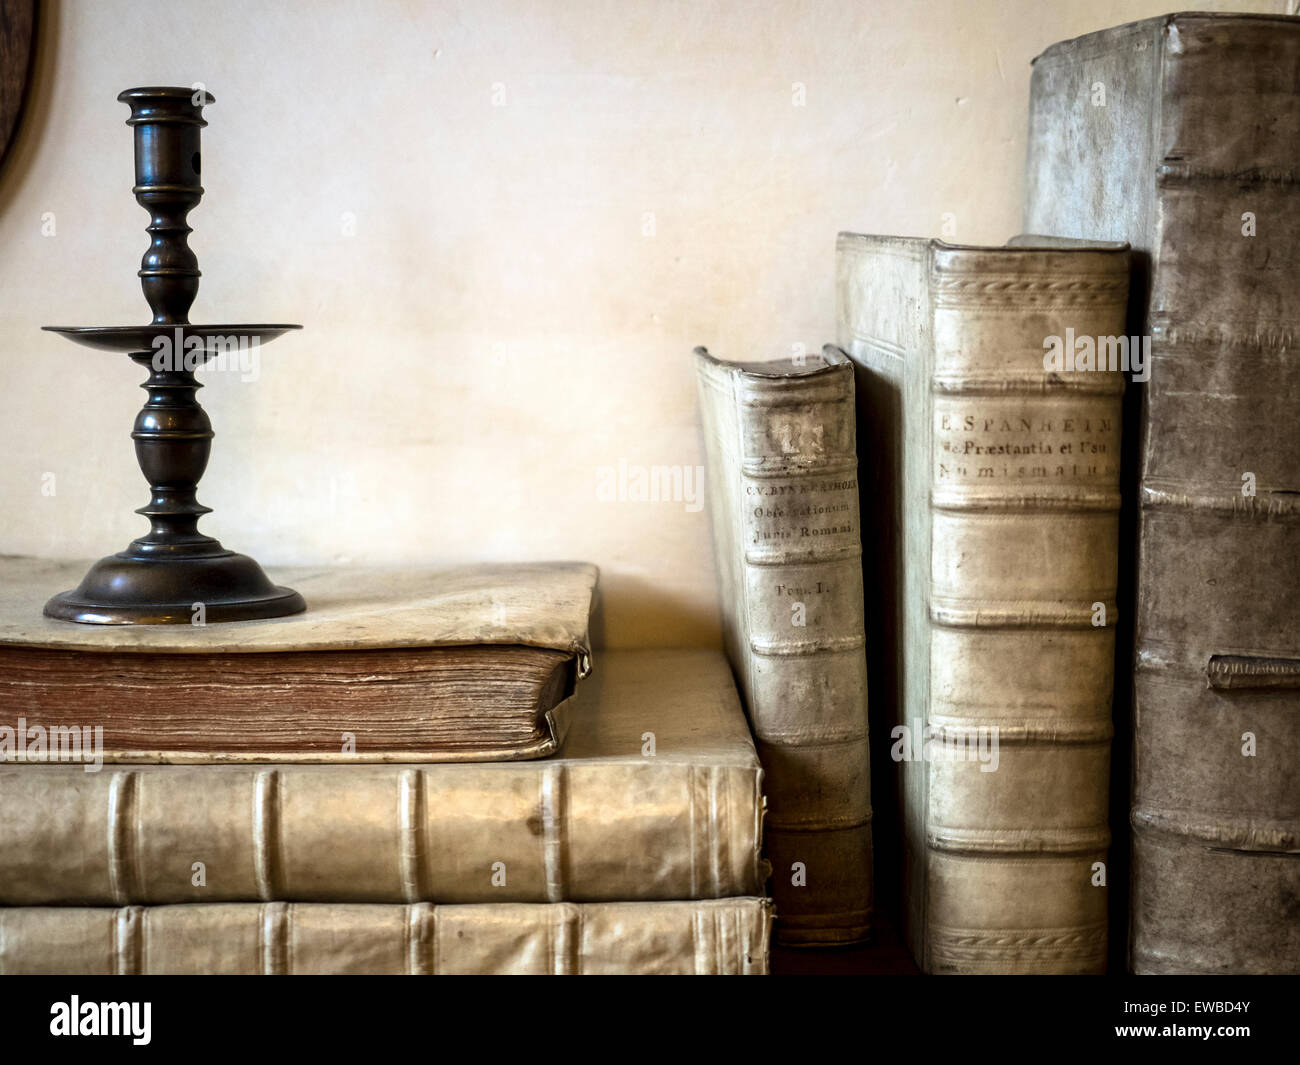 Books in the large studio in the Rembrandthuis (house of Rembrandt's) Museum - Amsterdam, Netherlands Stock Photo